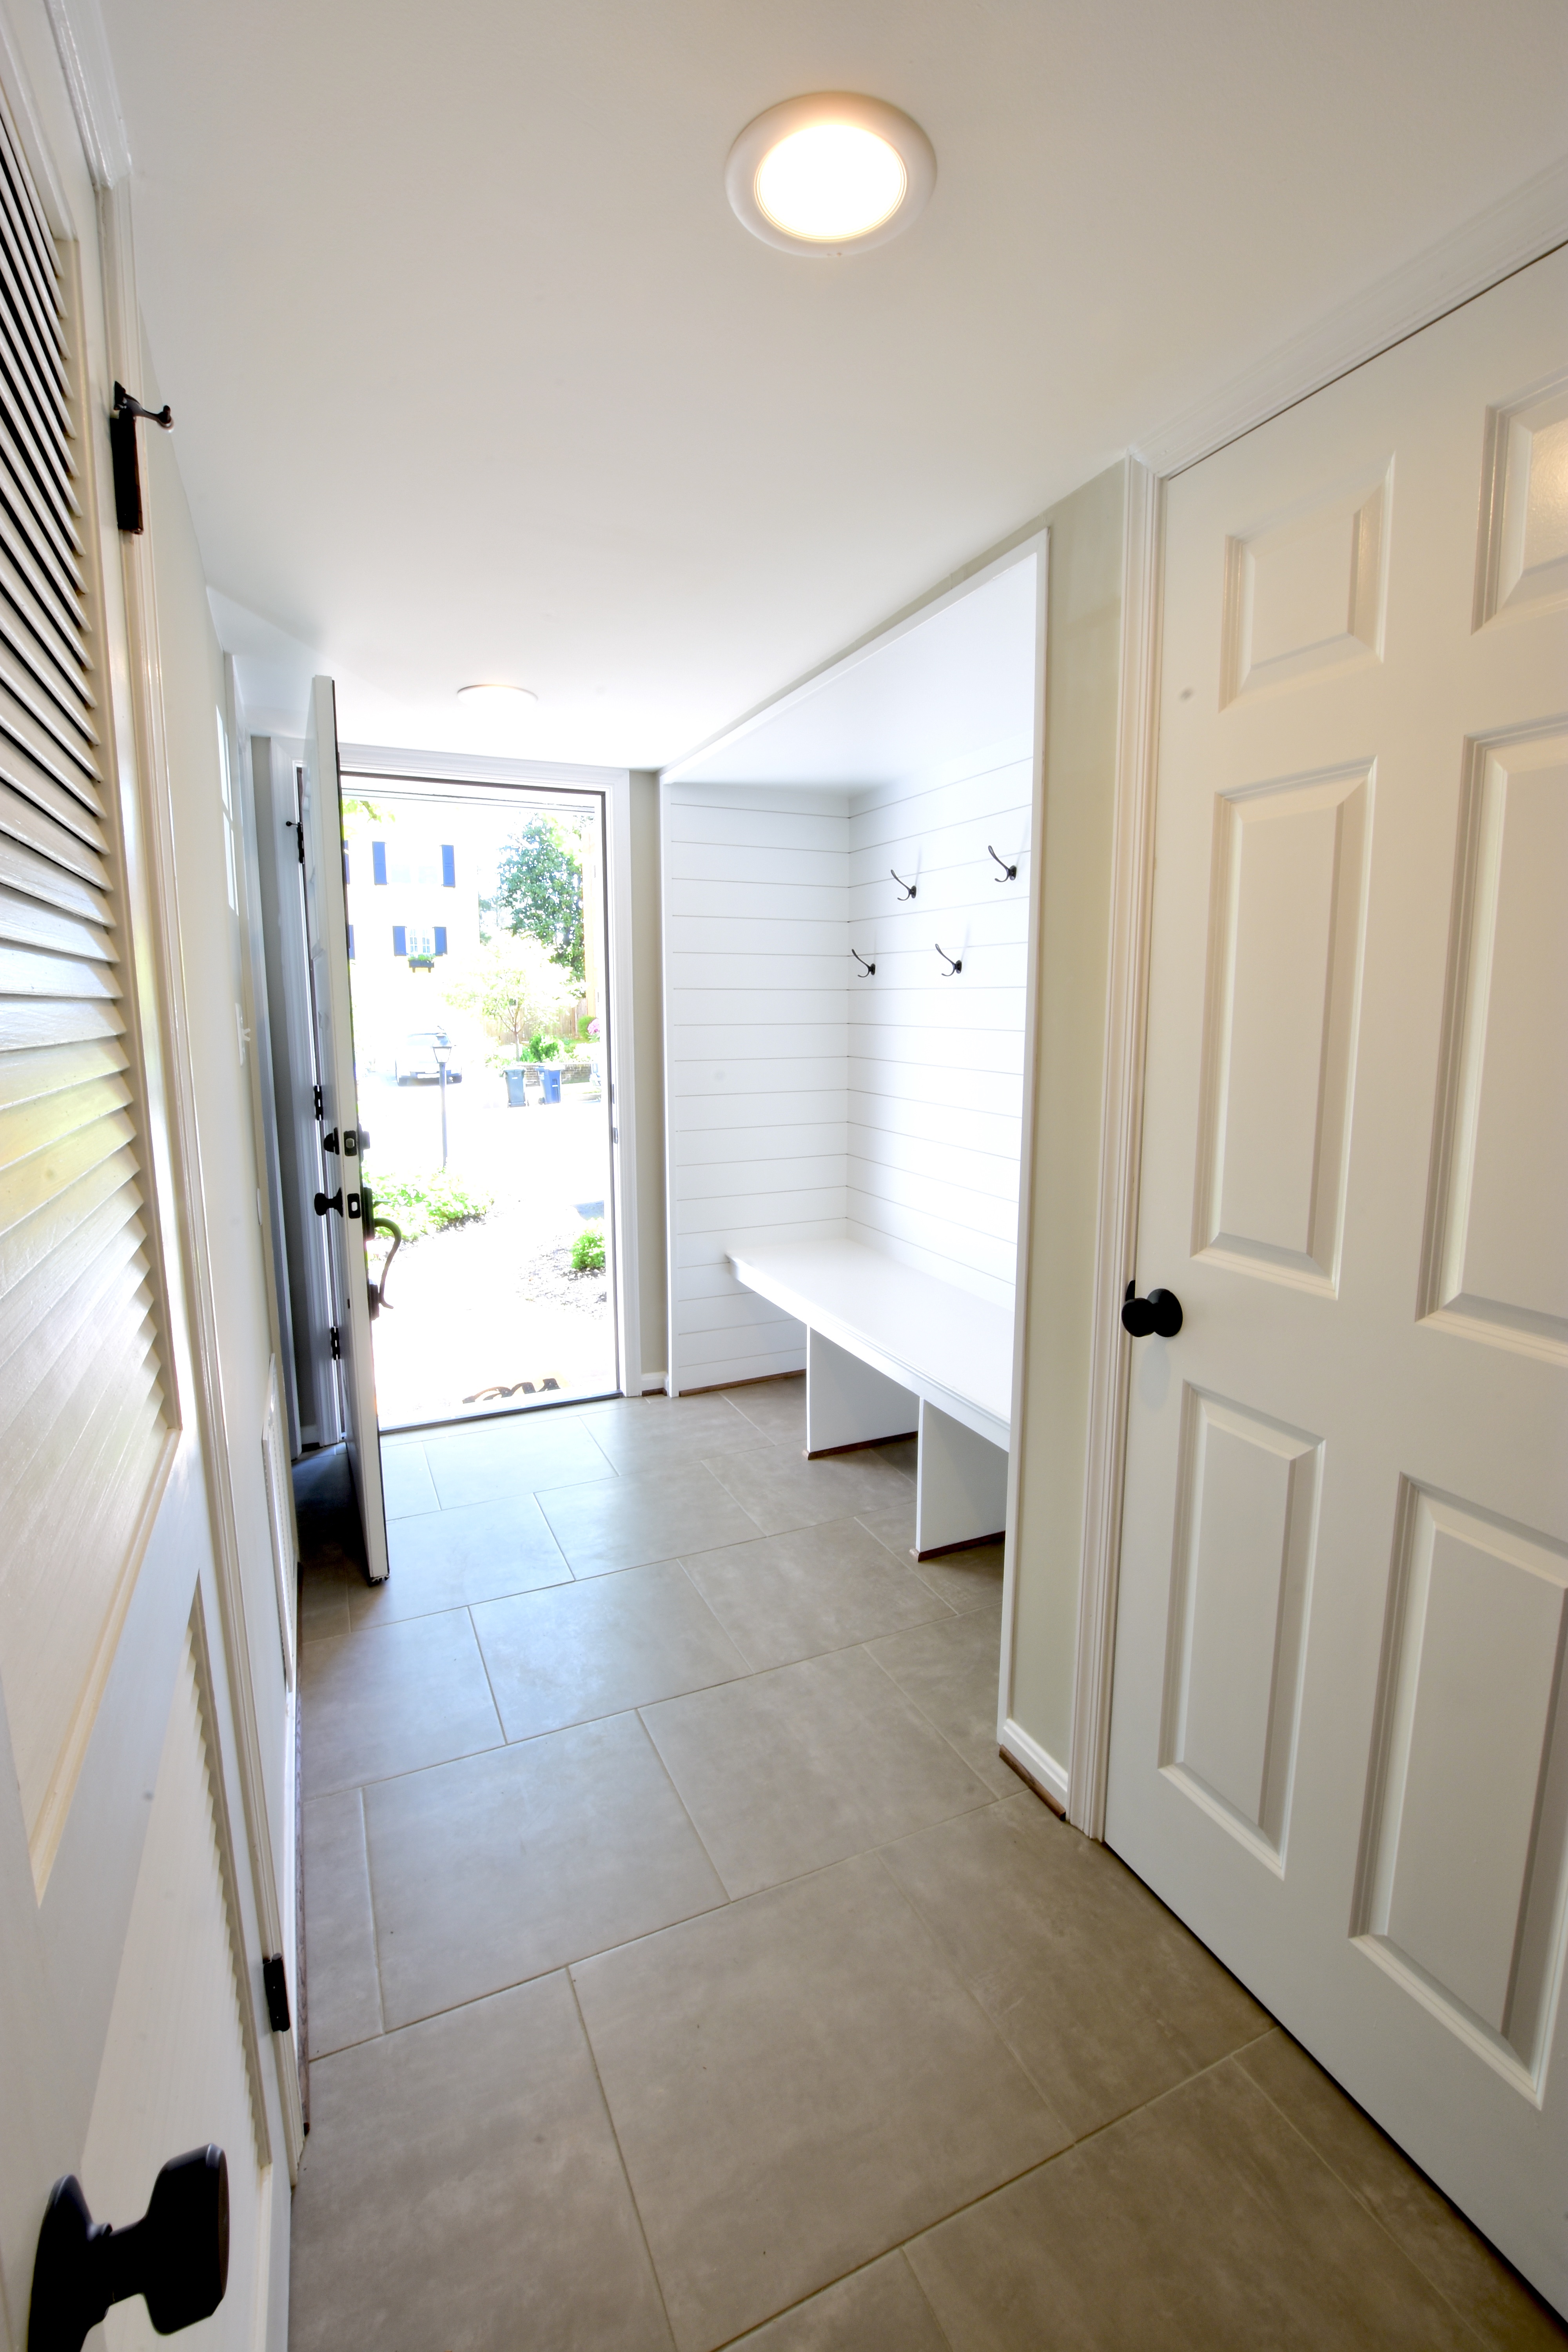 A Bright and Spacious Entry Way